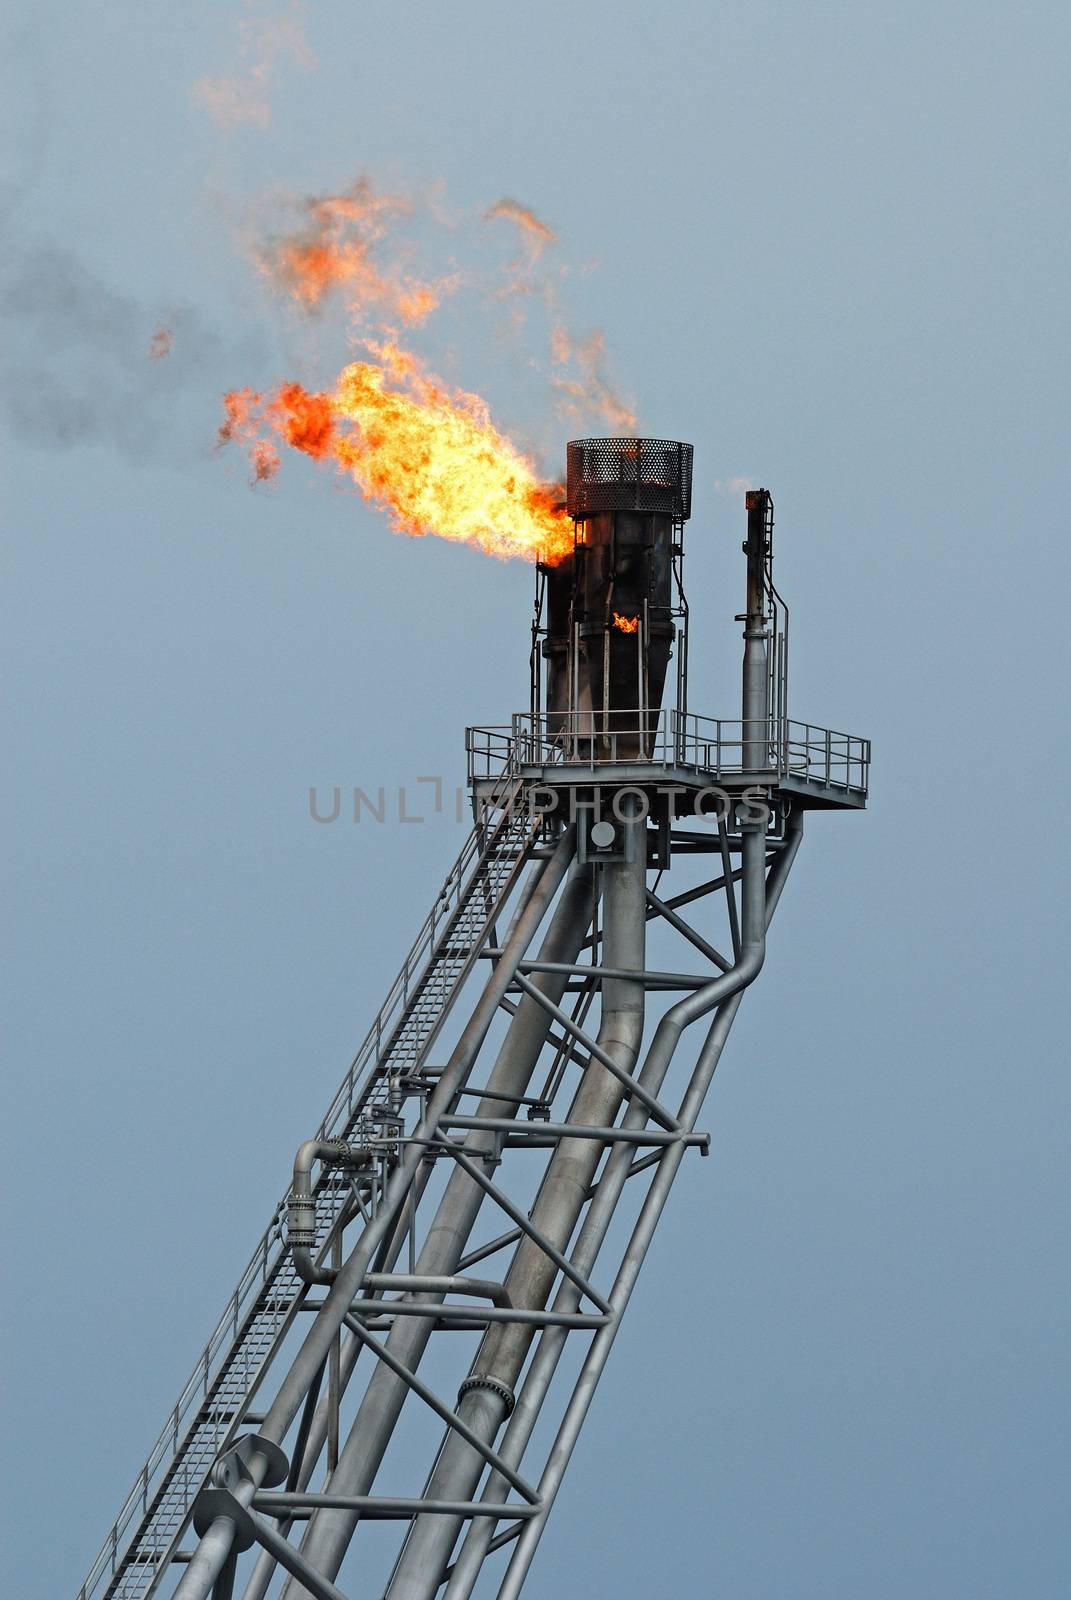 Flare boom nozzle and fire on offshore oil rig by think4photop